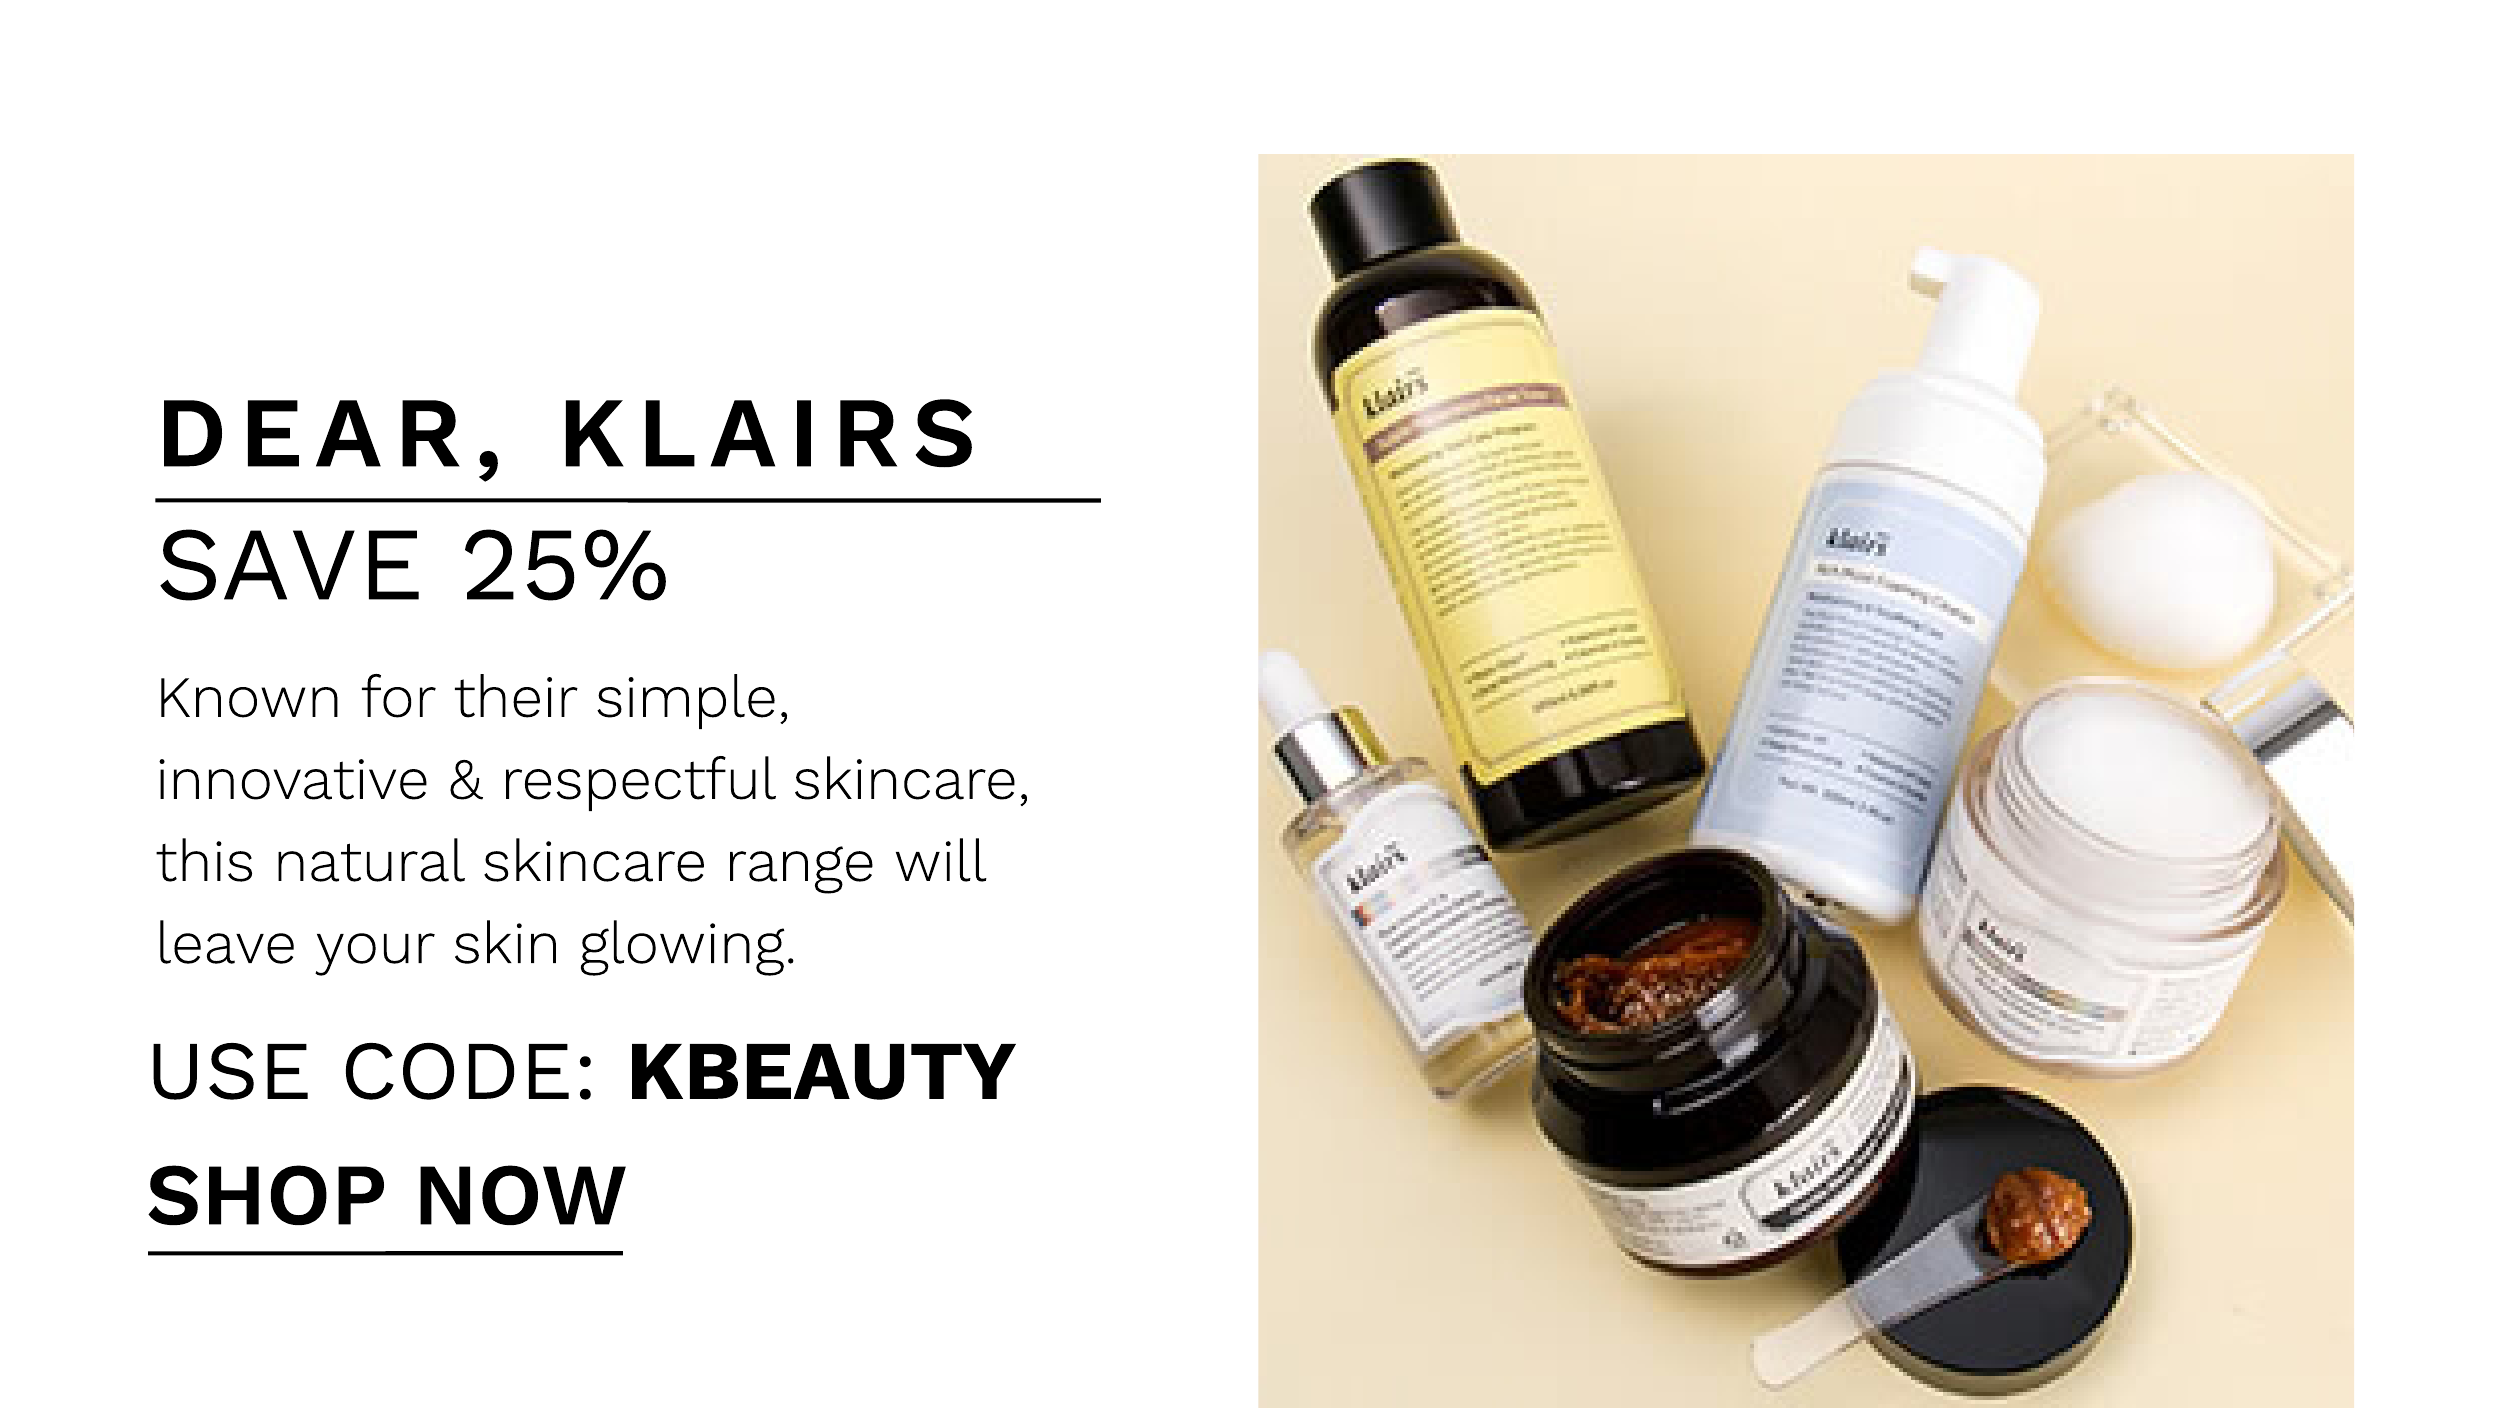 DEAR, KLAIRS SAVE 25% Known for their simple, innovative respectful skincare, this natural skincare range will leave your skin glowing. USE CODE: KBEAUTY SHOP NOW 